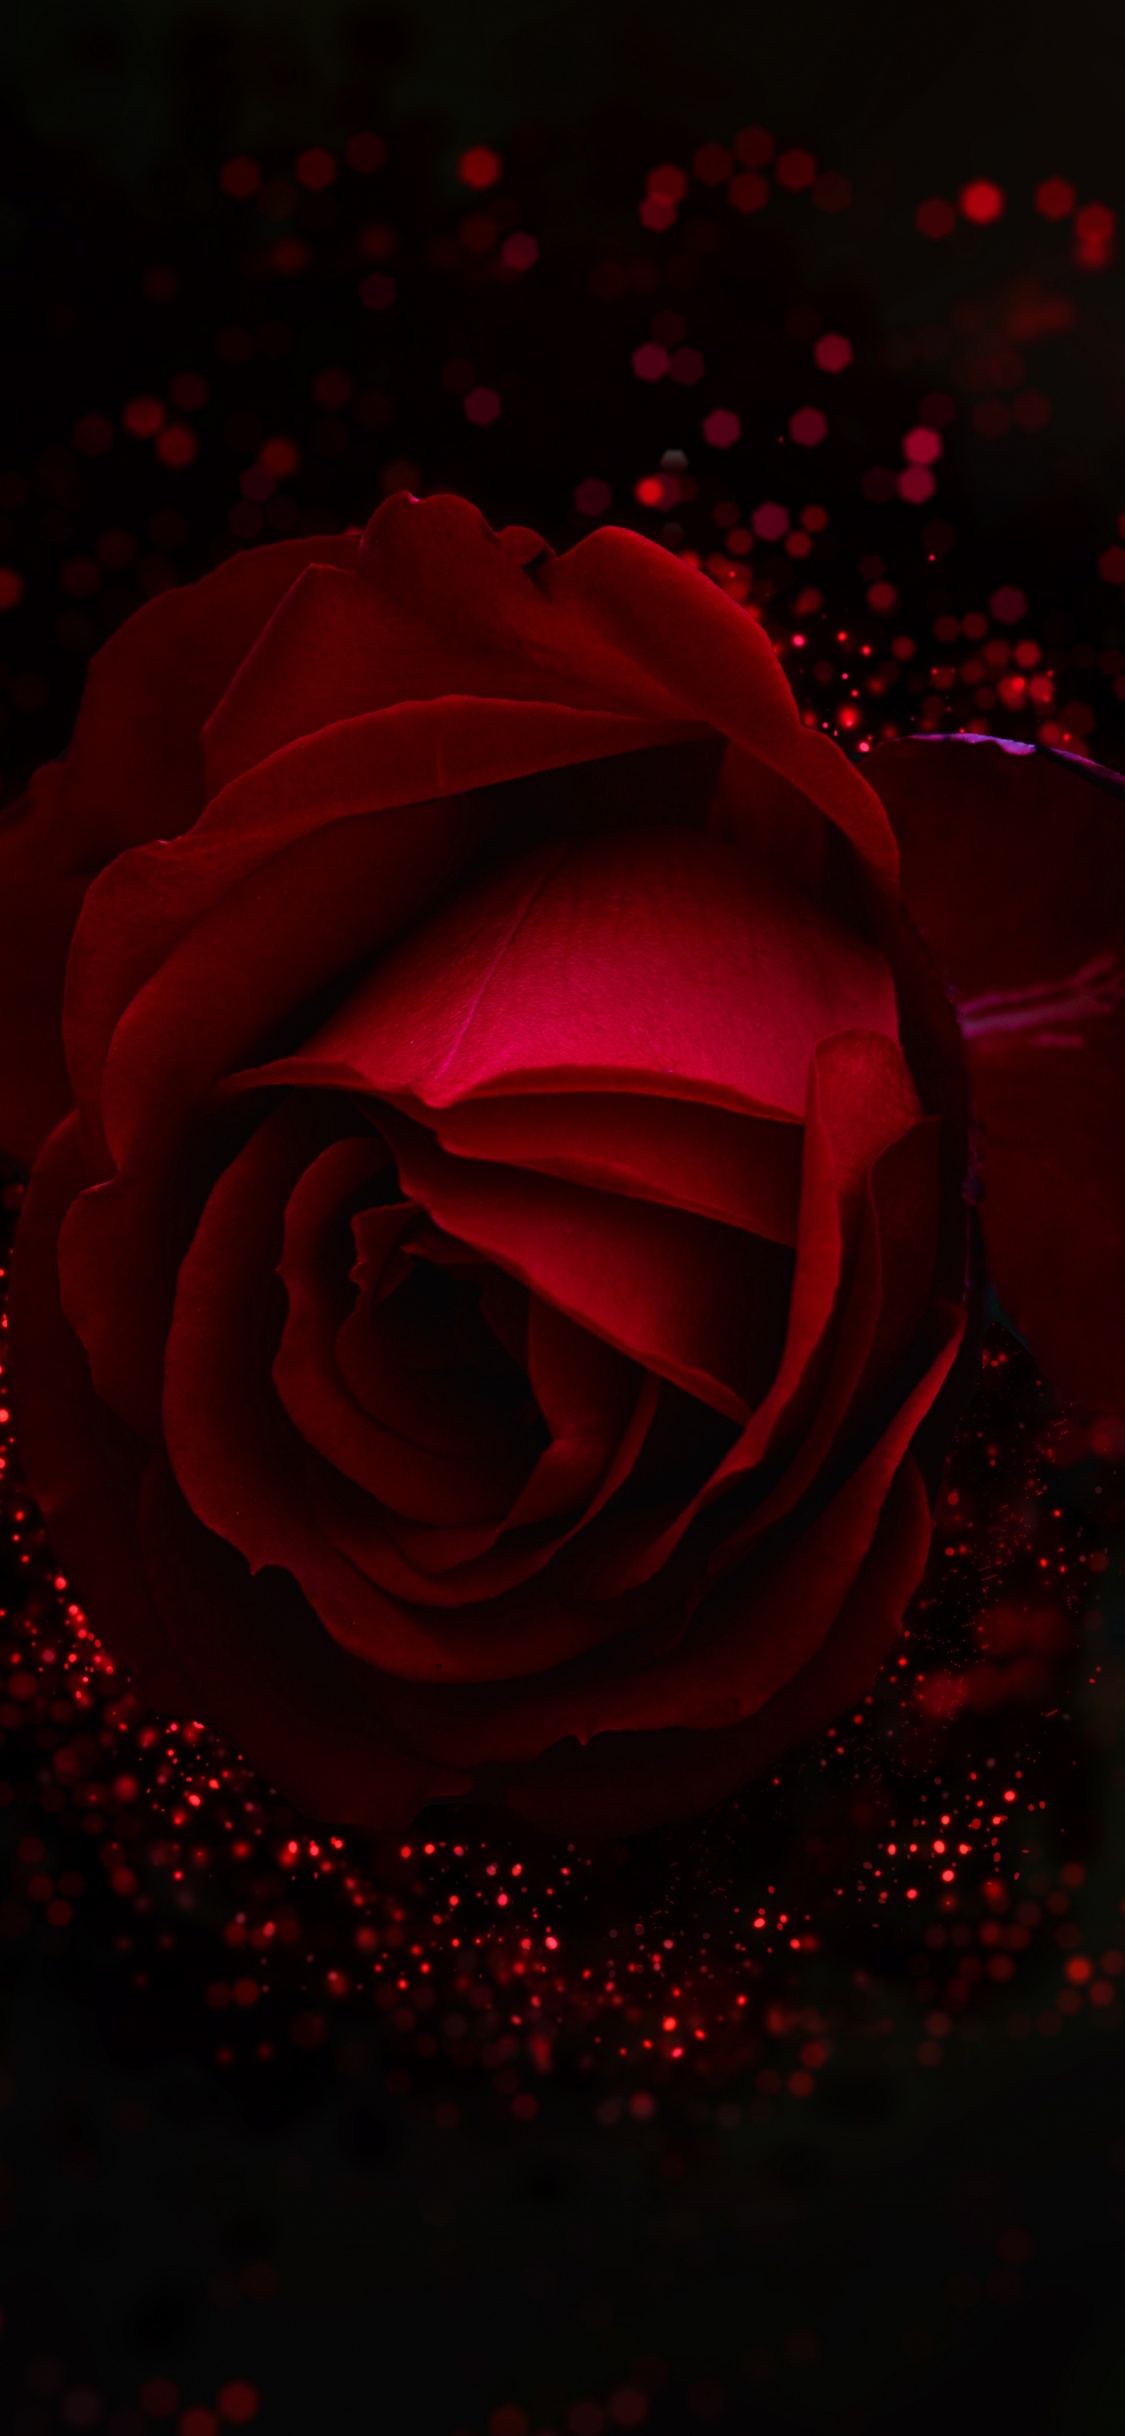 Red Rose With Water Droplets. Wallpaper in 1125x2436 Resolution